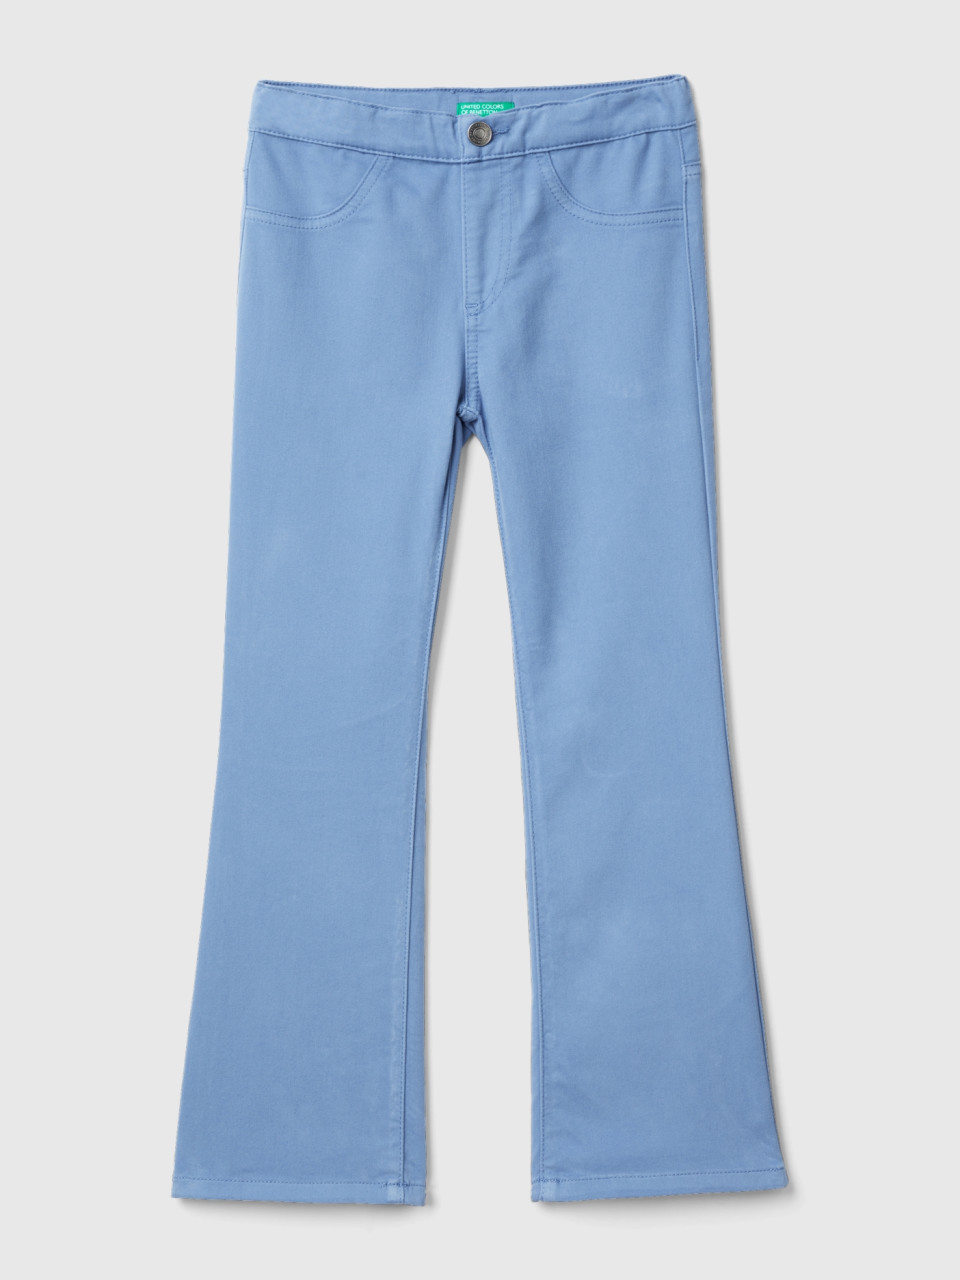 Benetton, Flared Stretch Trousers, Light Blue, Kids